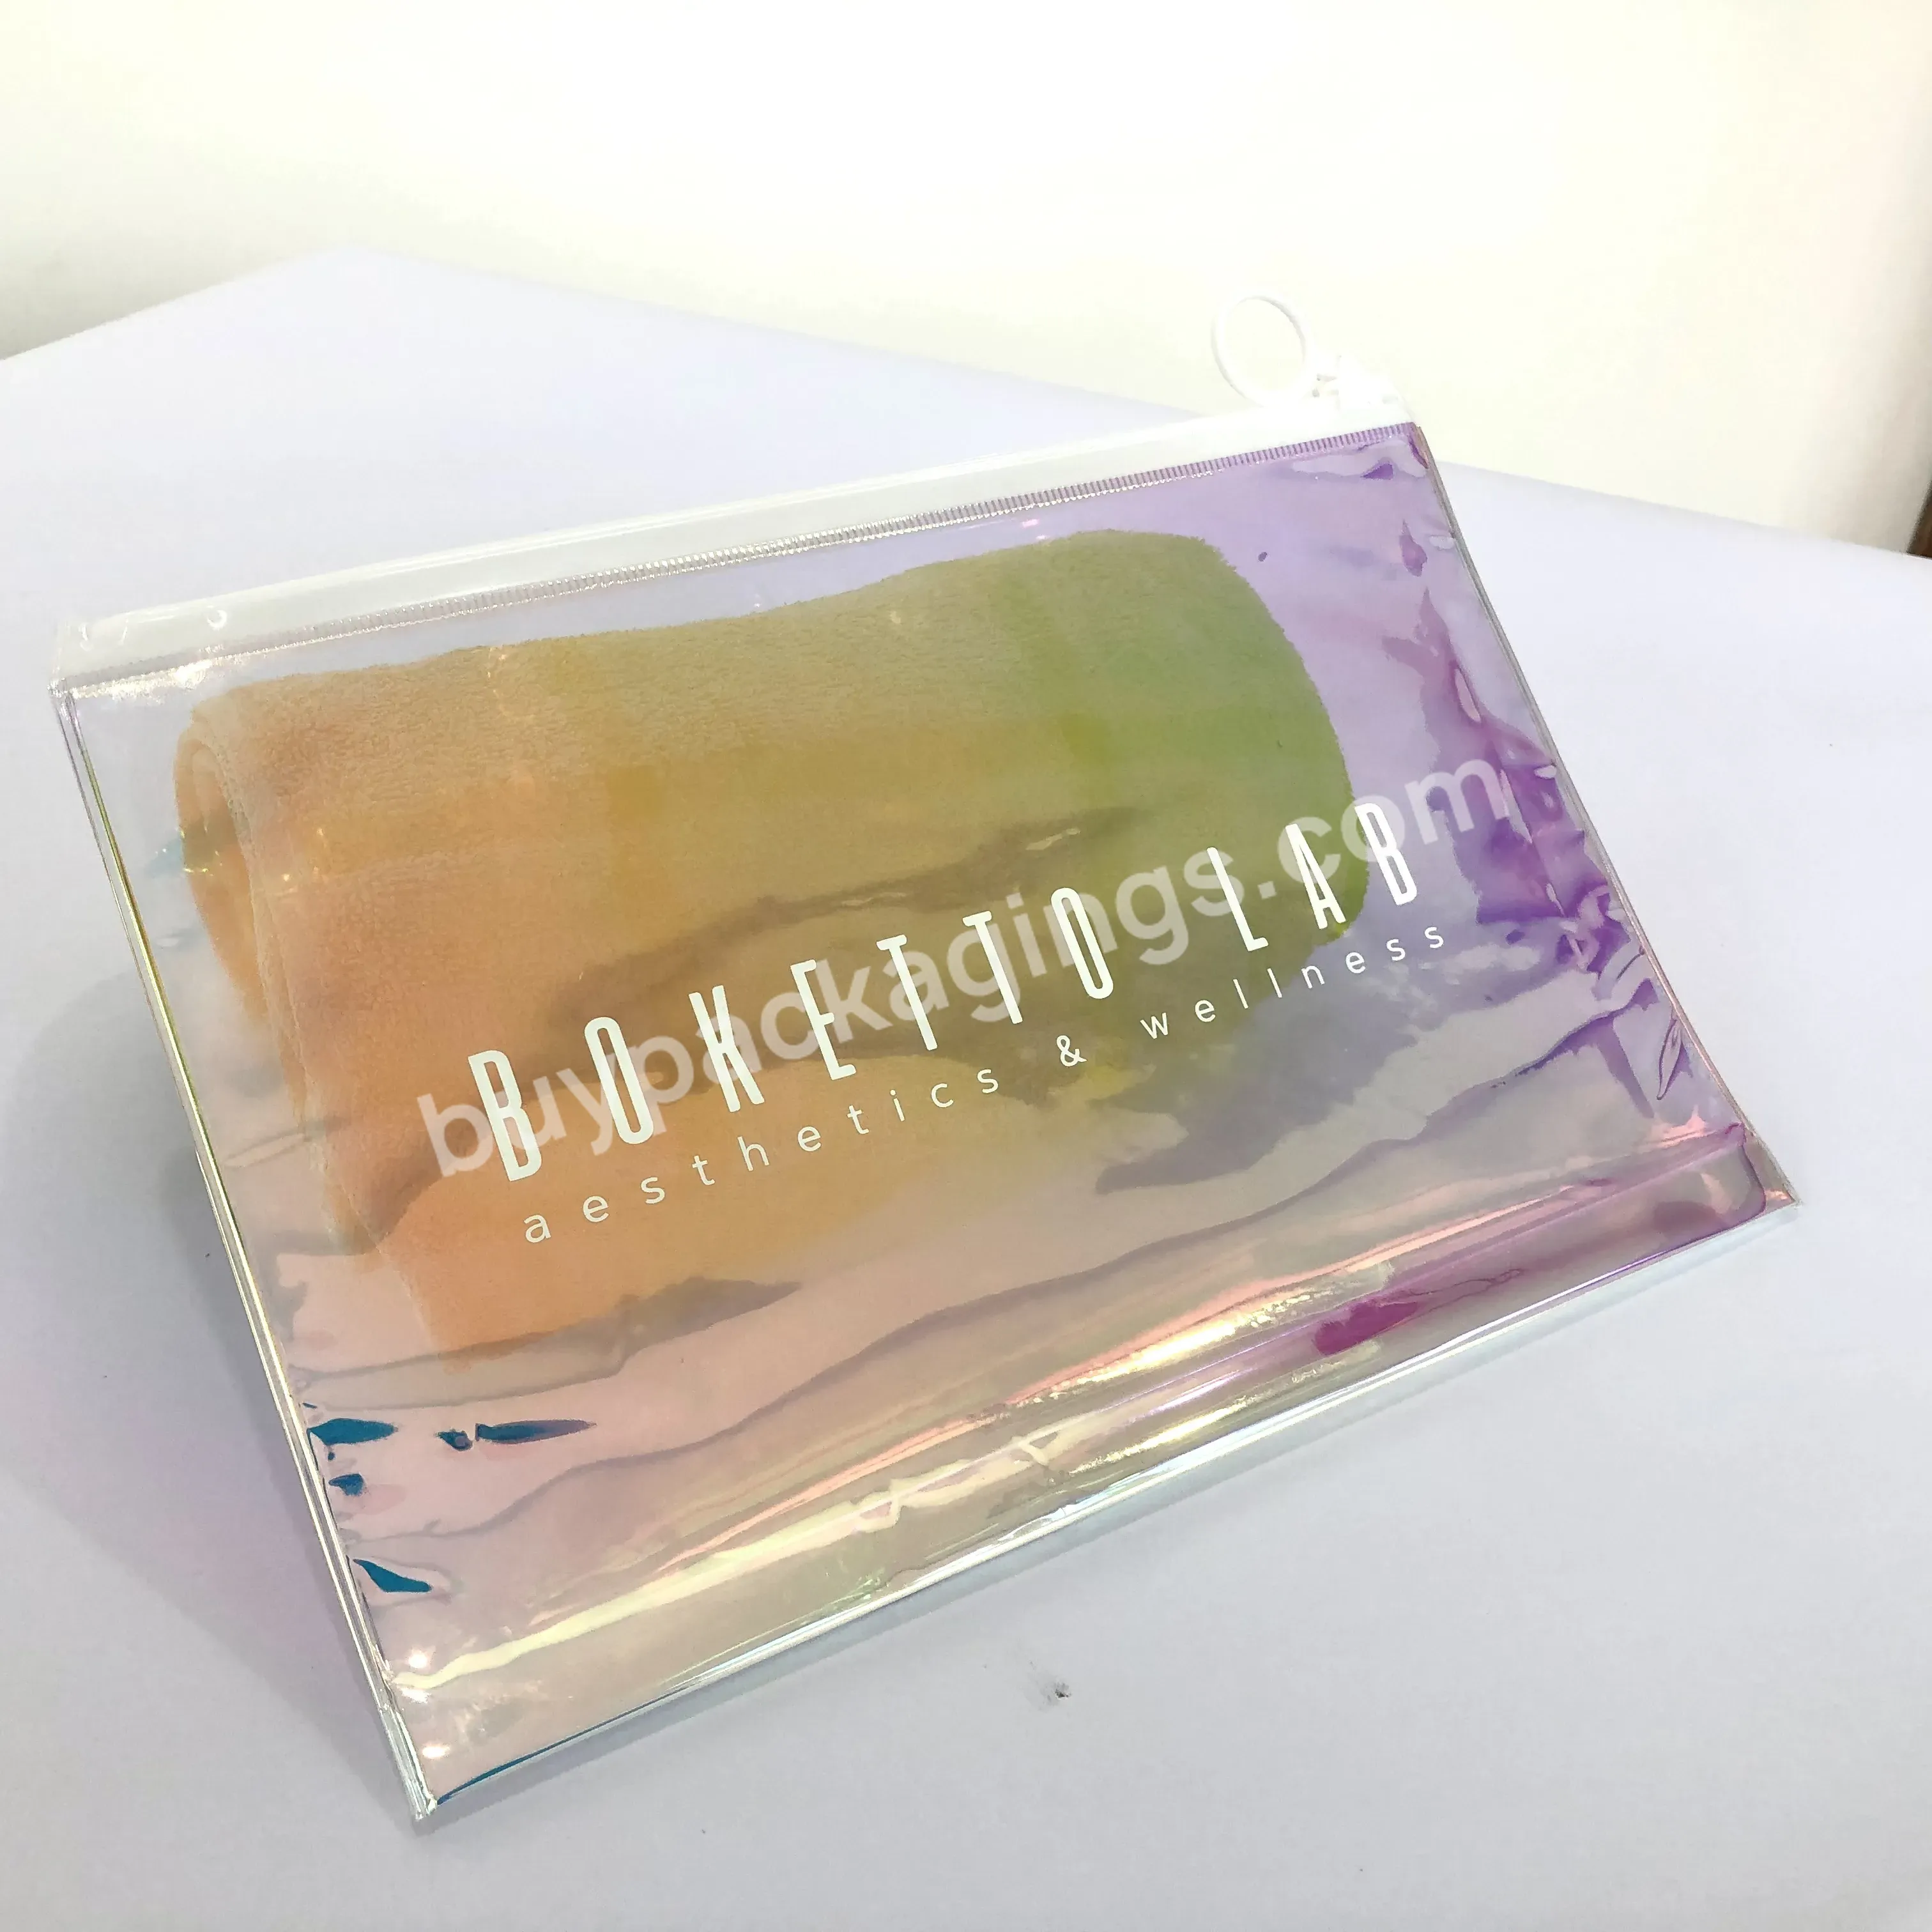 Customized Holographic Pvc Laser Waterproof Poly Metallic Mailer Clear Side Bag - Buy Holographic Bag Ziplock,Holographic Poly Metallic Mailer Clear Side Bag,Holographic Pvc Bag.